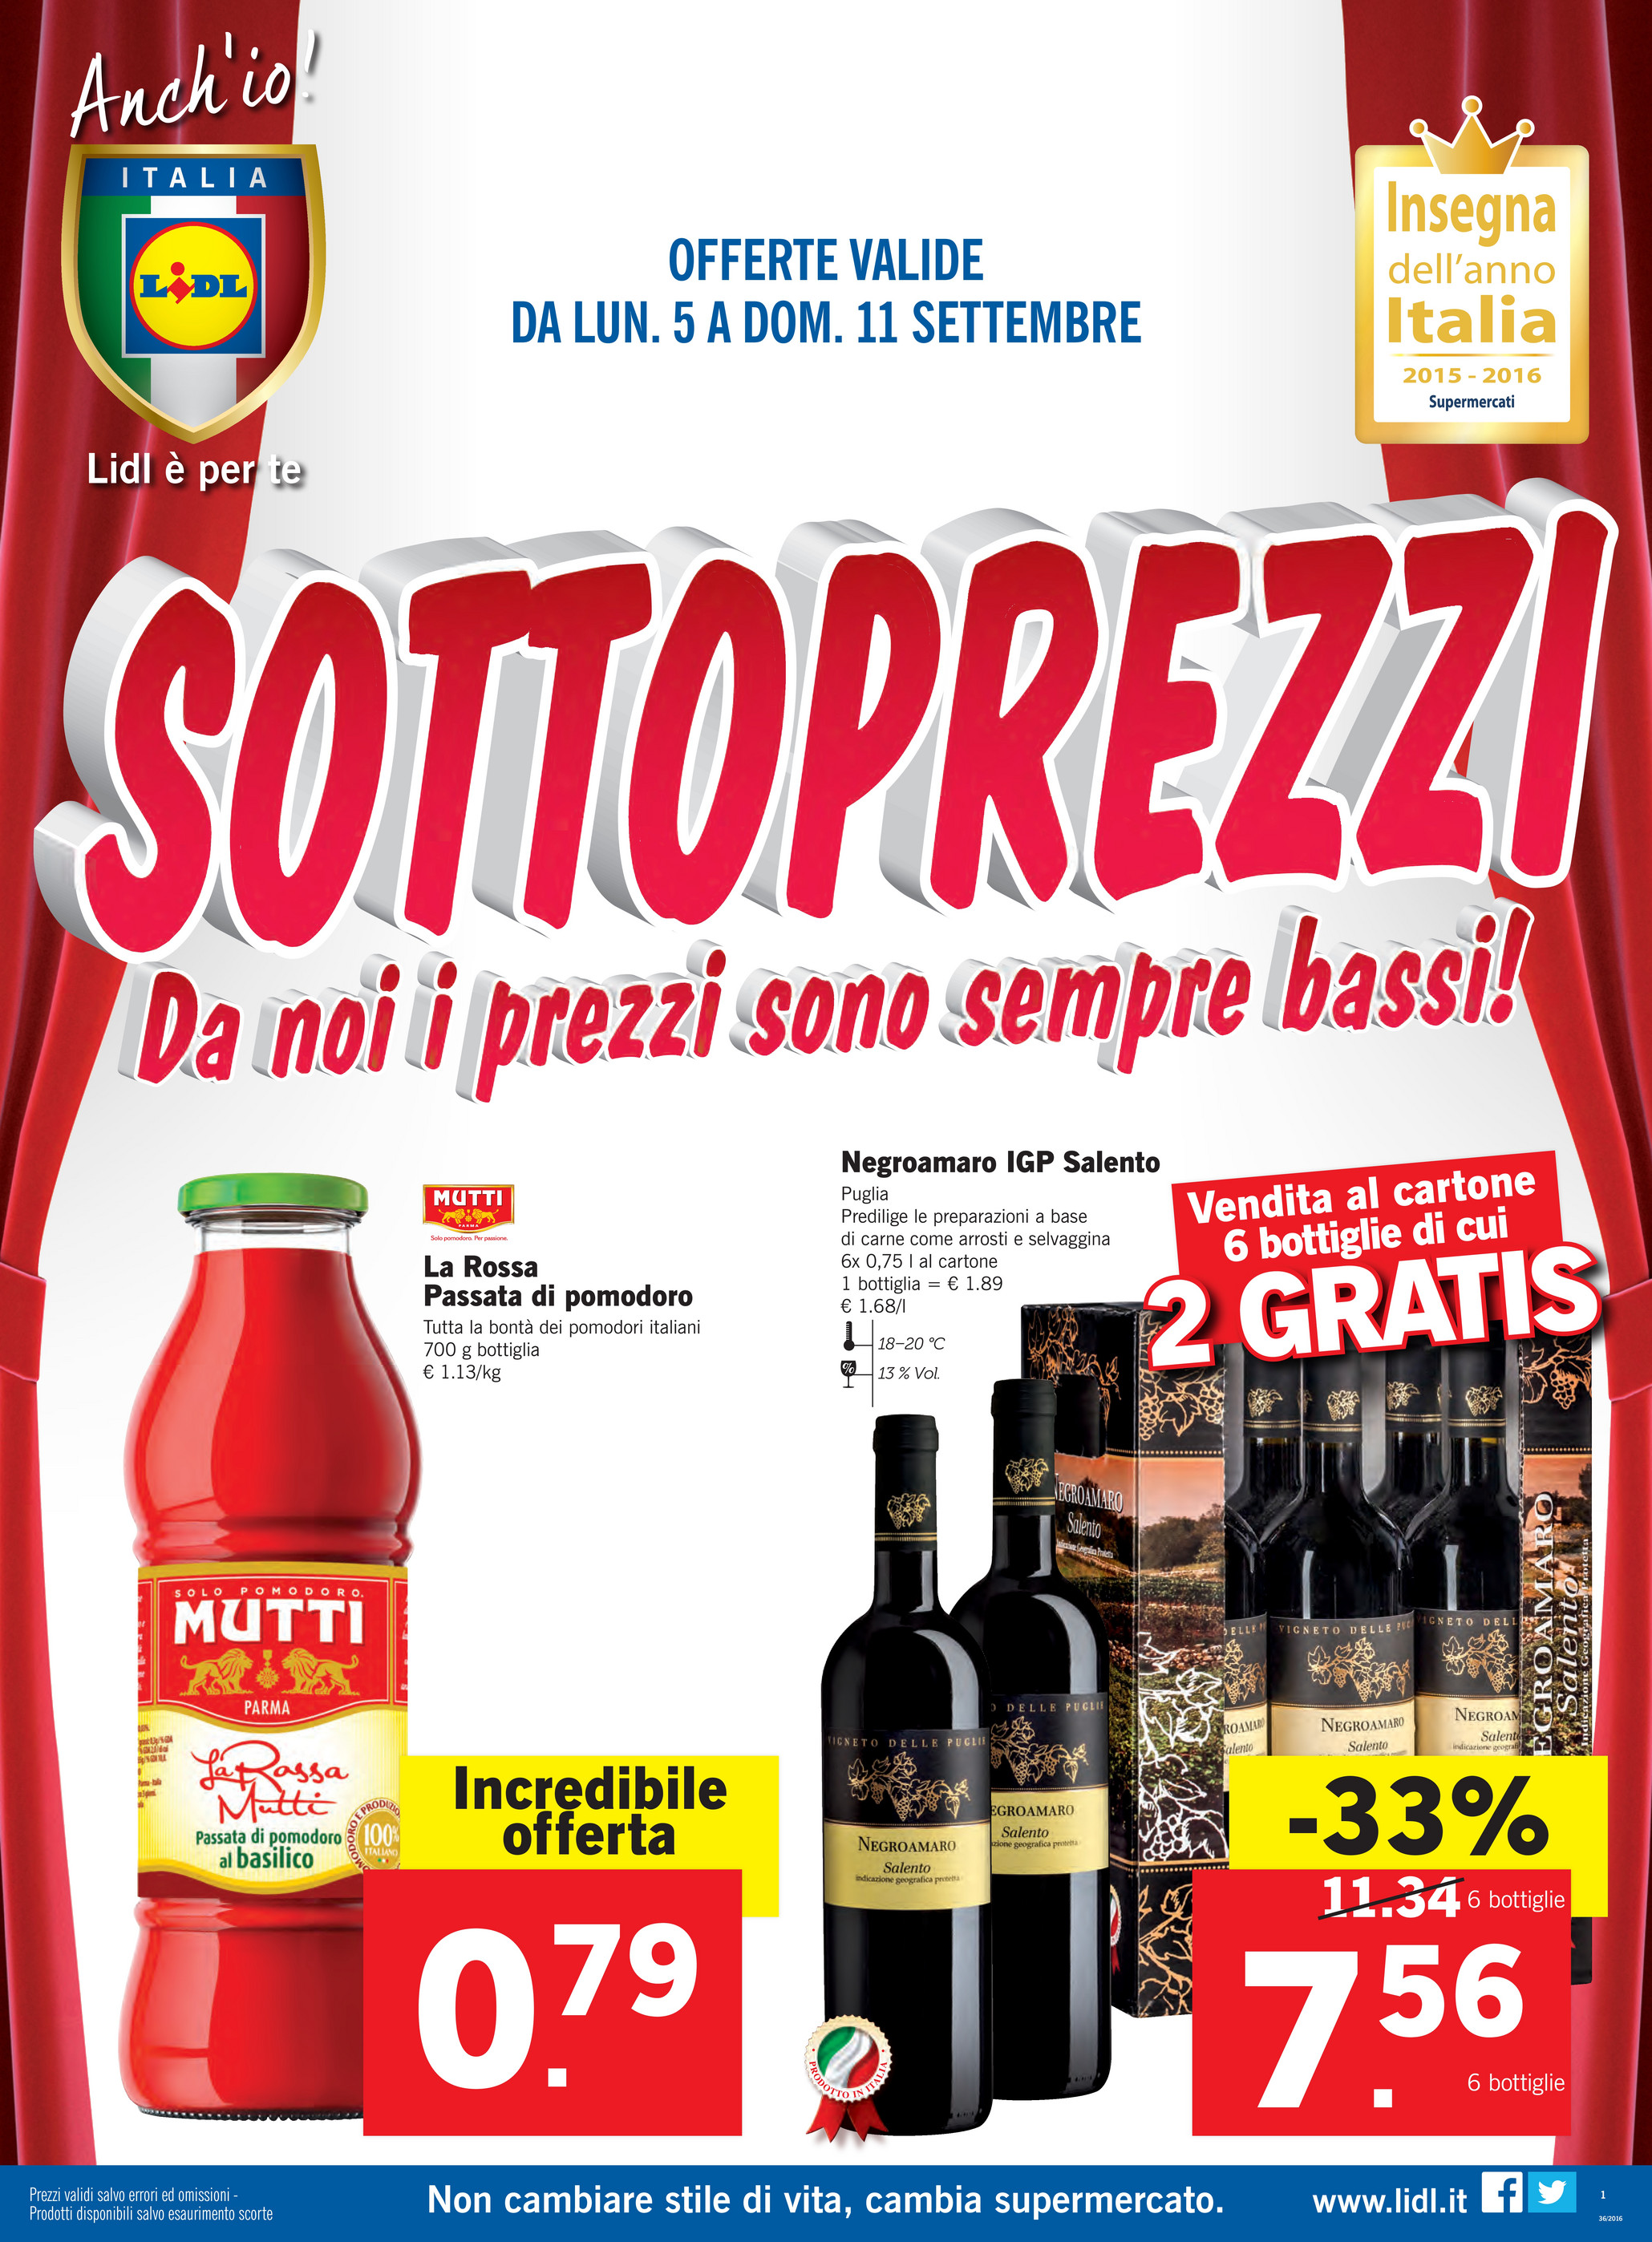 SP - Volantino Lidl - SottoPrezzi - Page 2-3 - Created with Publitas.com